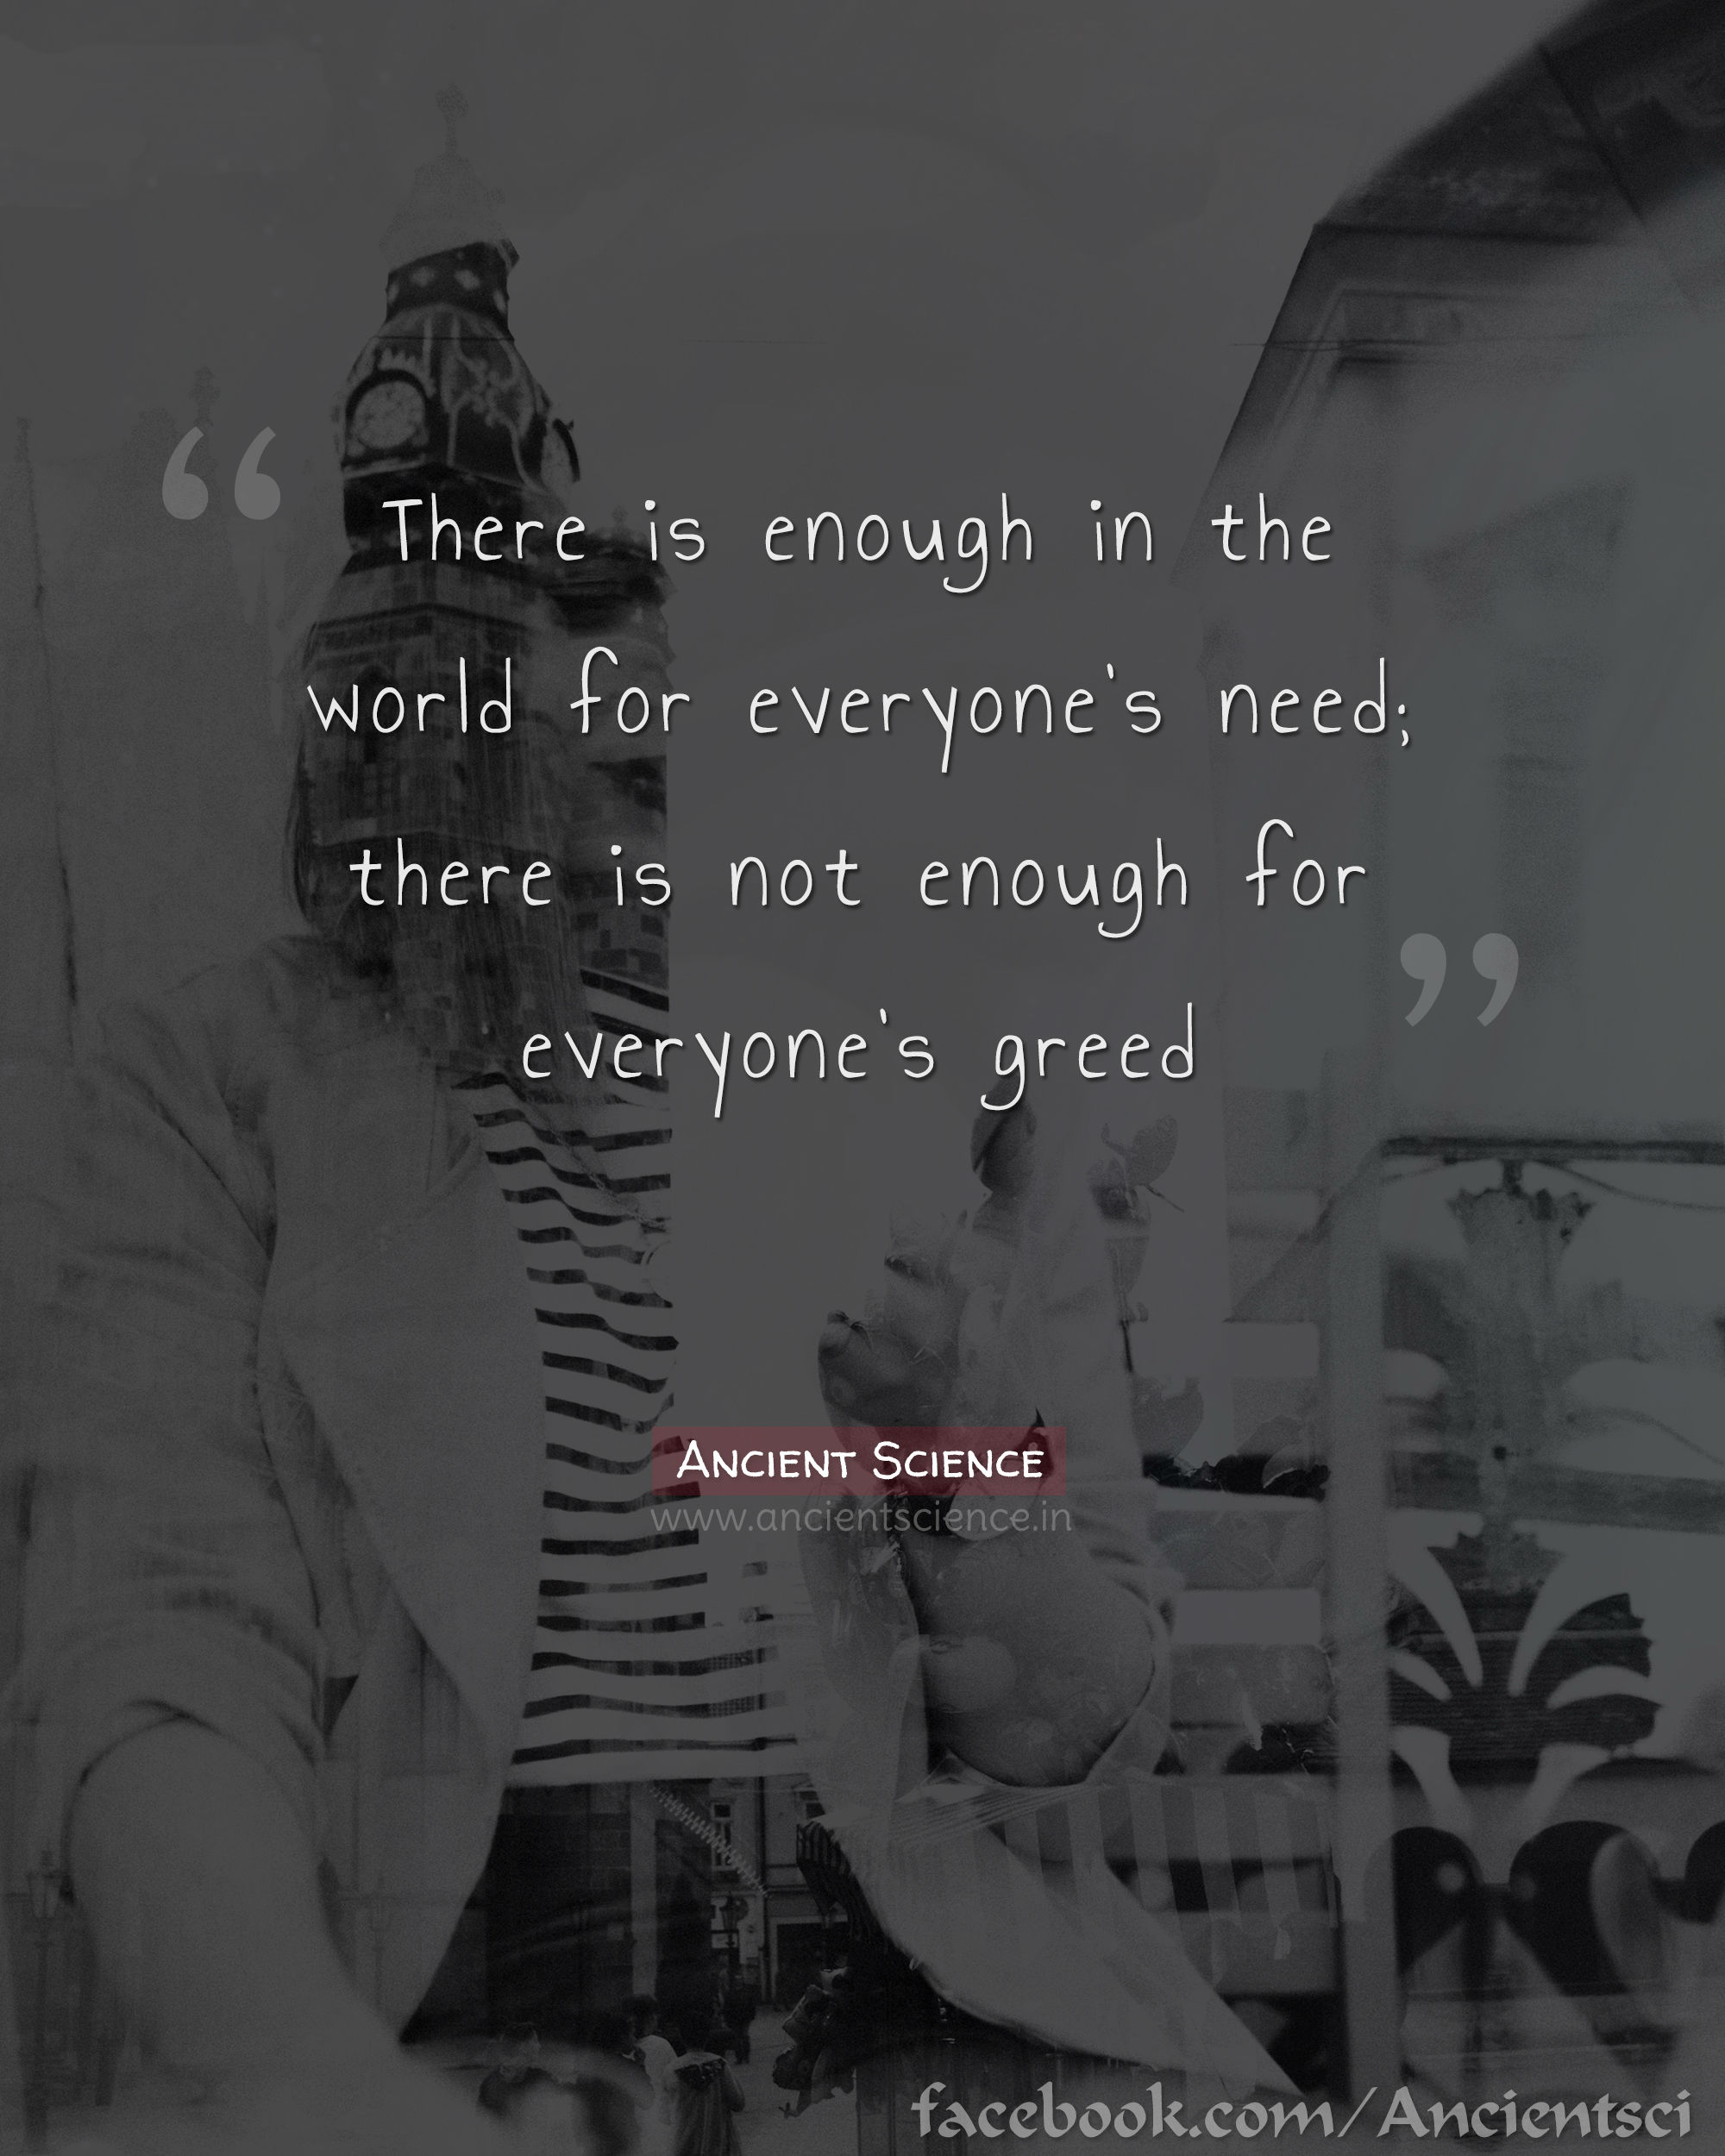 There is enough in the world for everyone’s need; there is not enough for everyone’s greed.